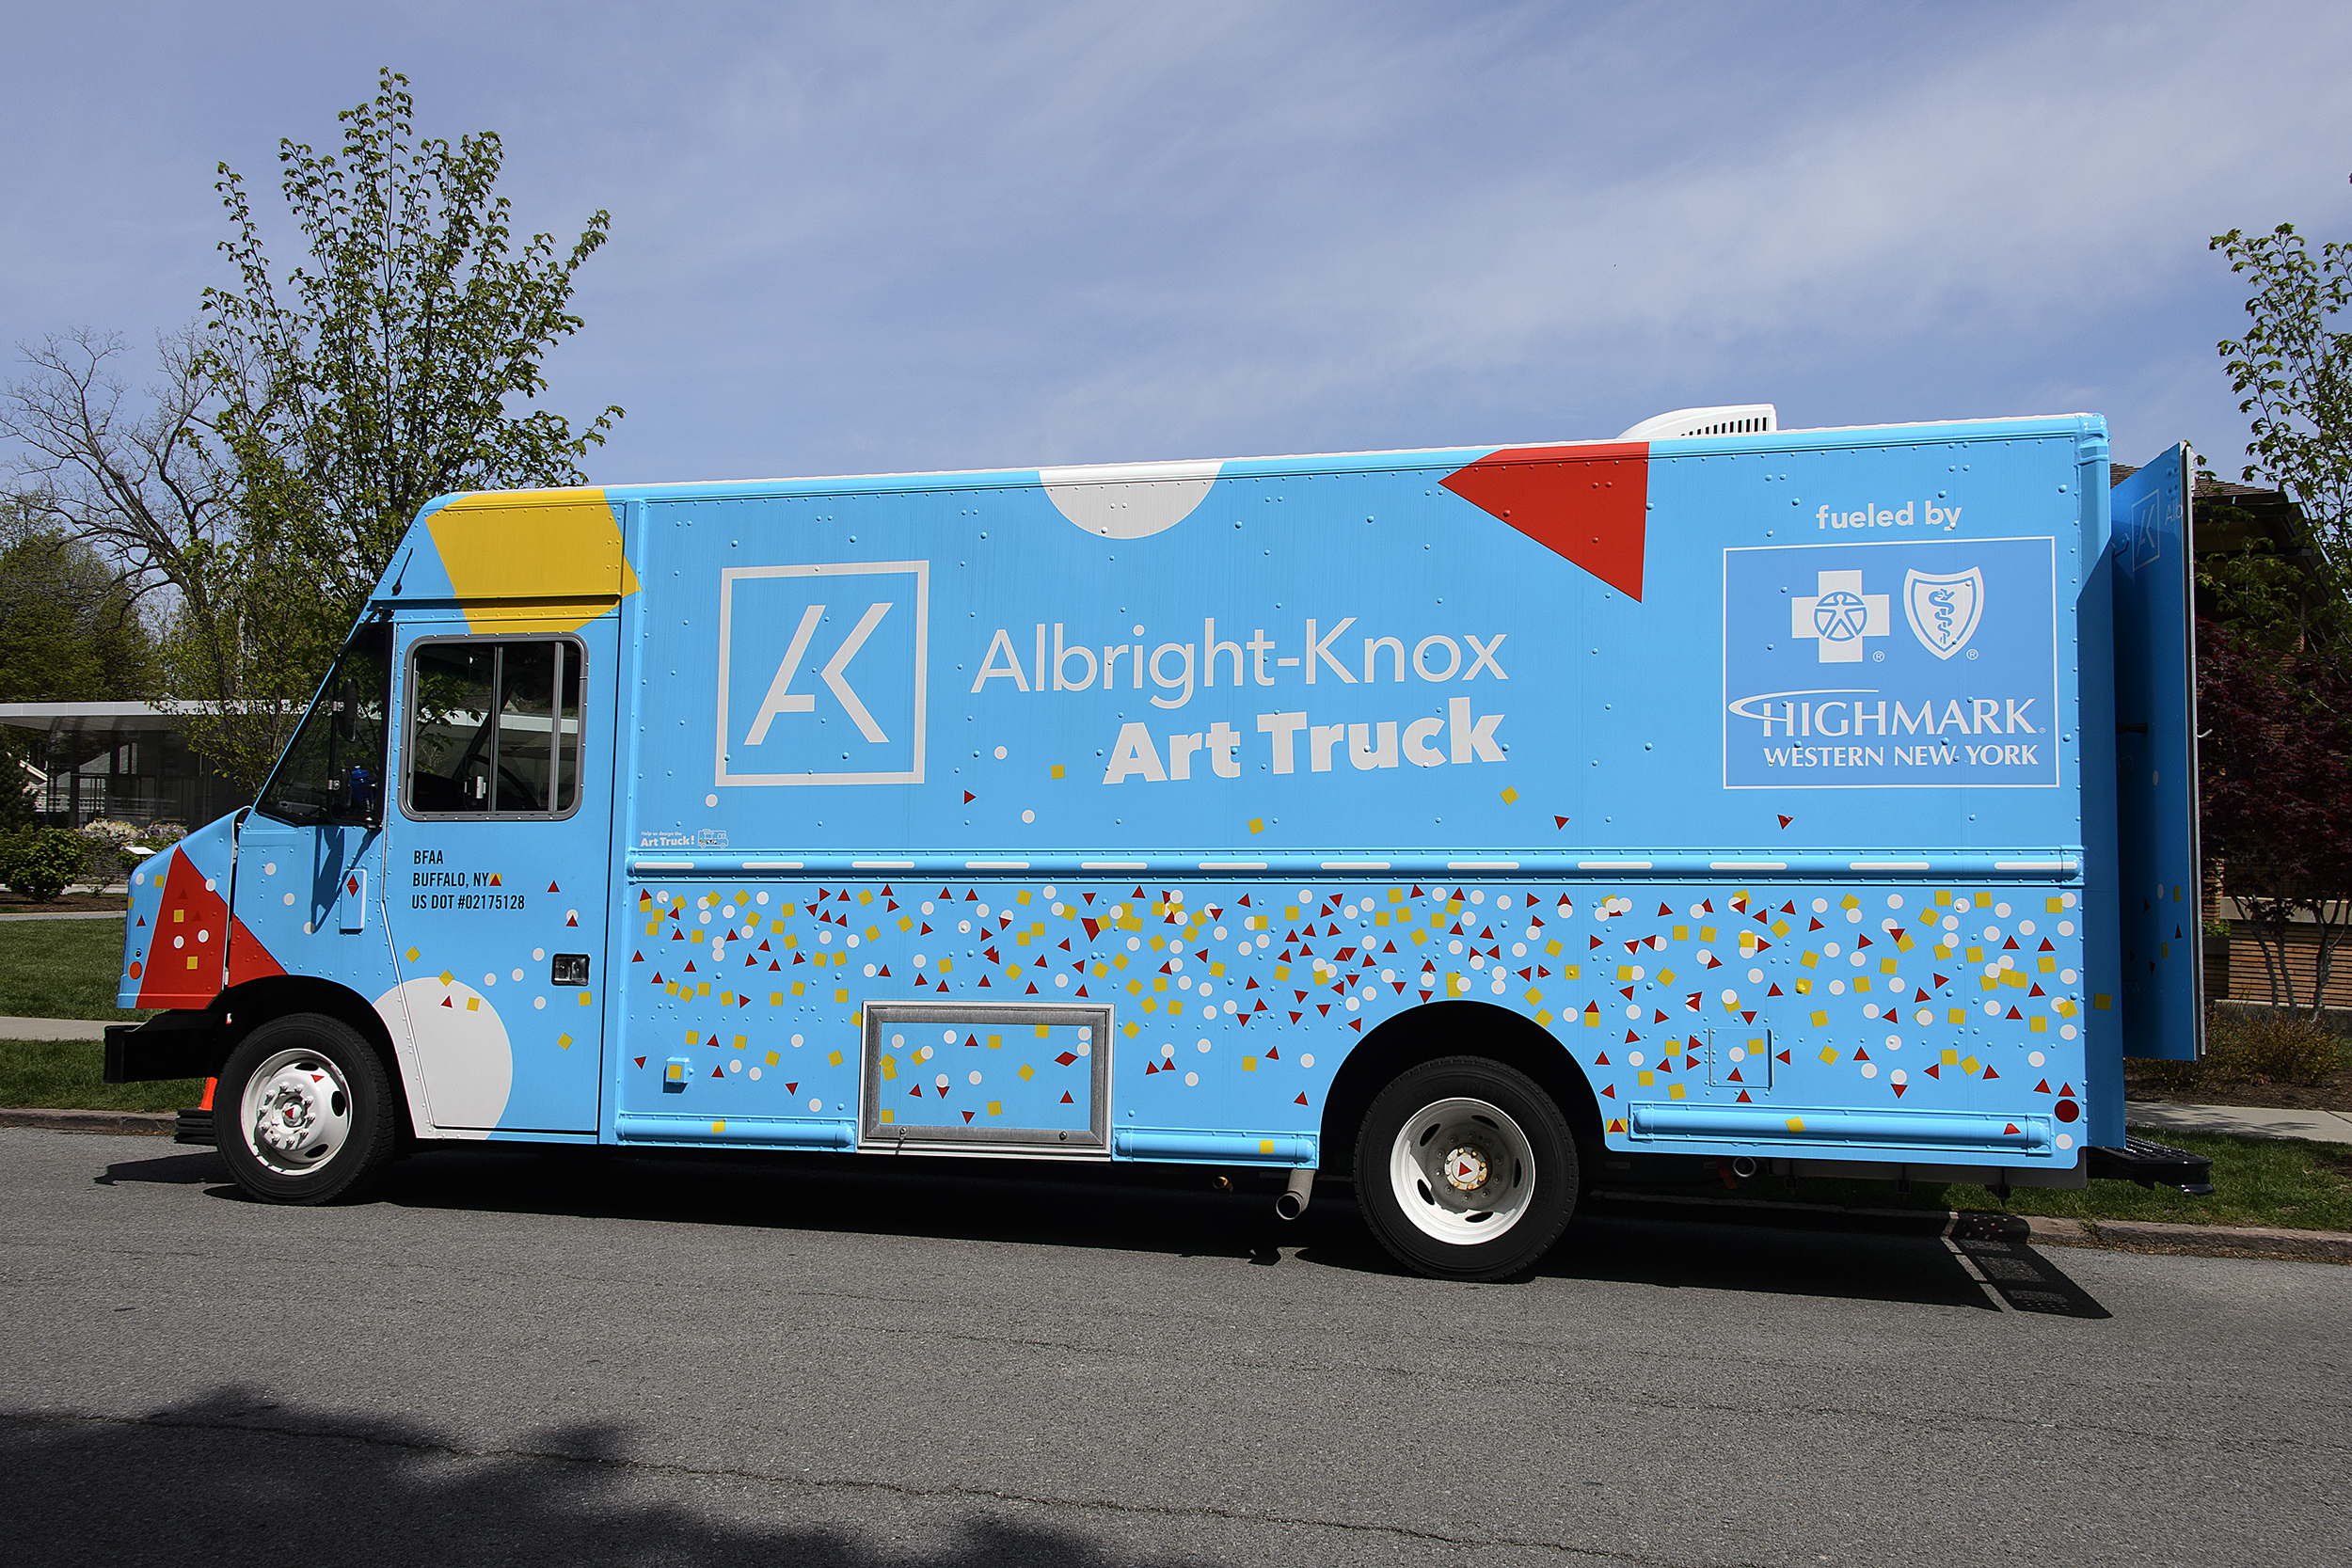 A large blue truck with red, yellow, and white shapes decorating it